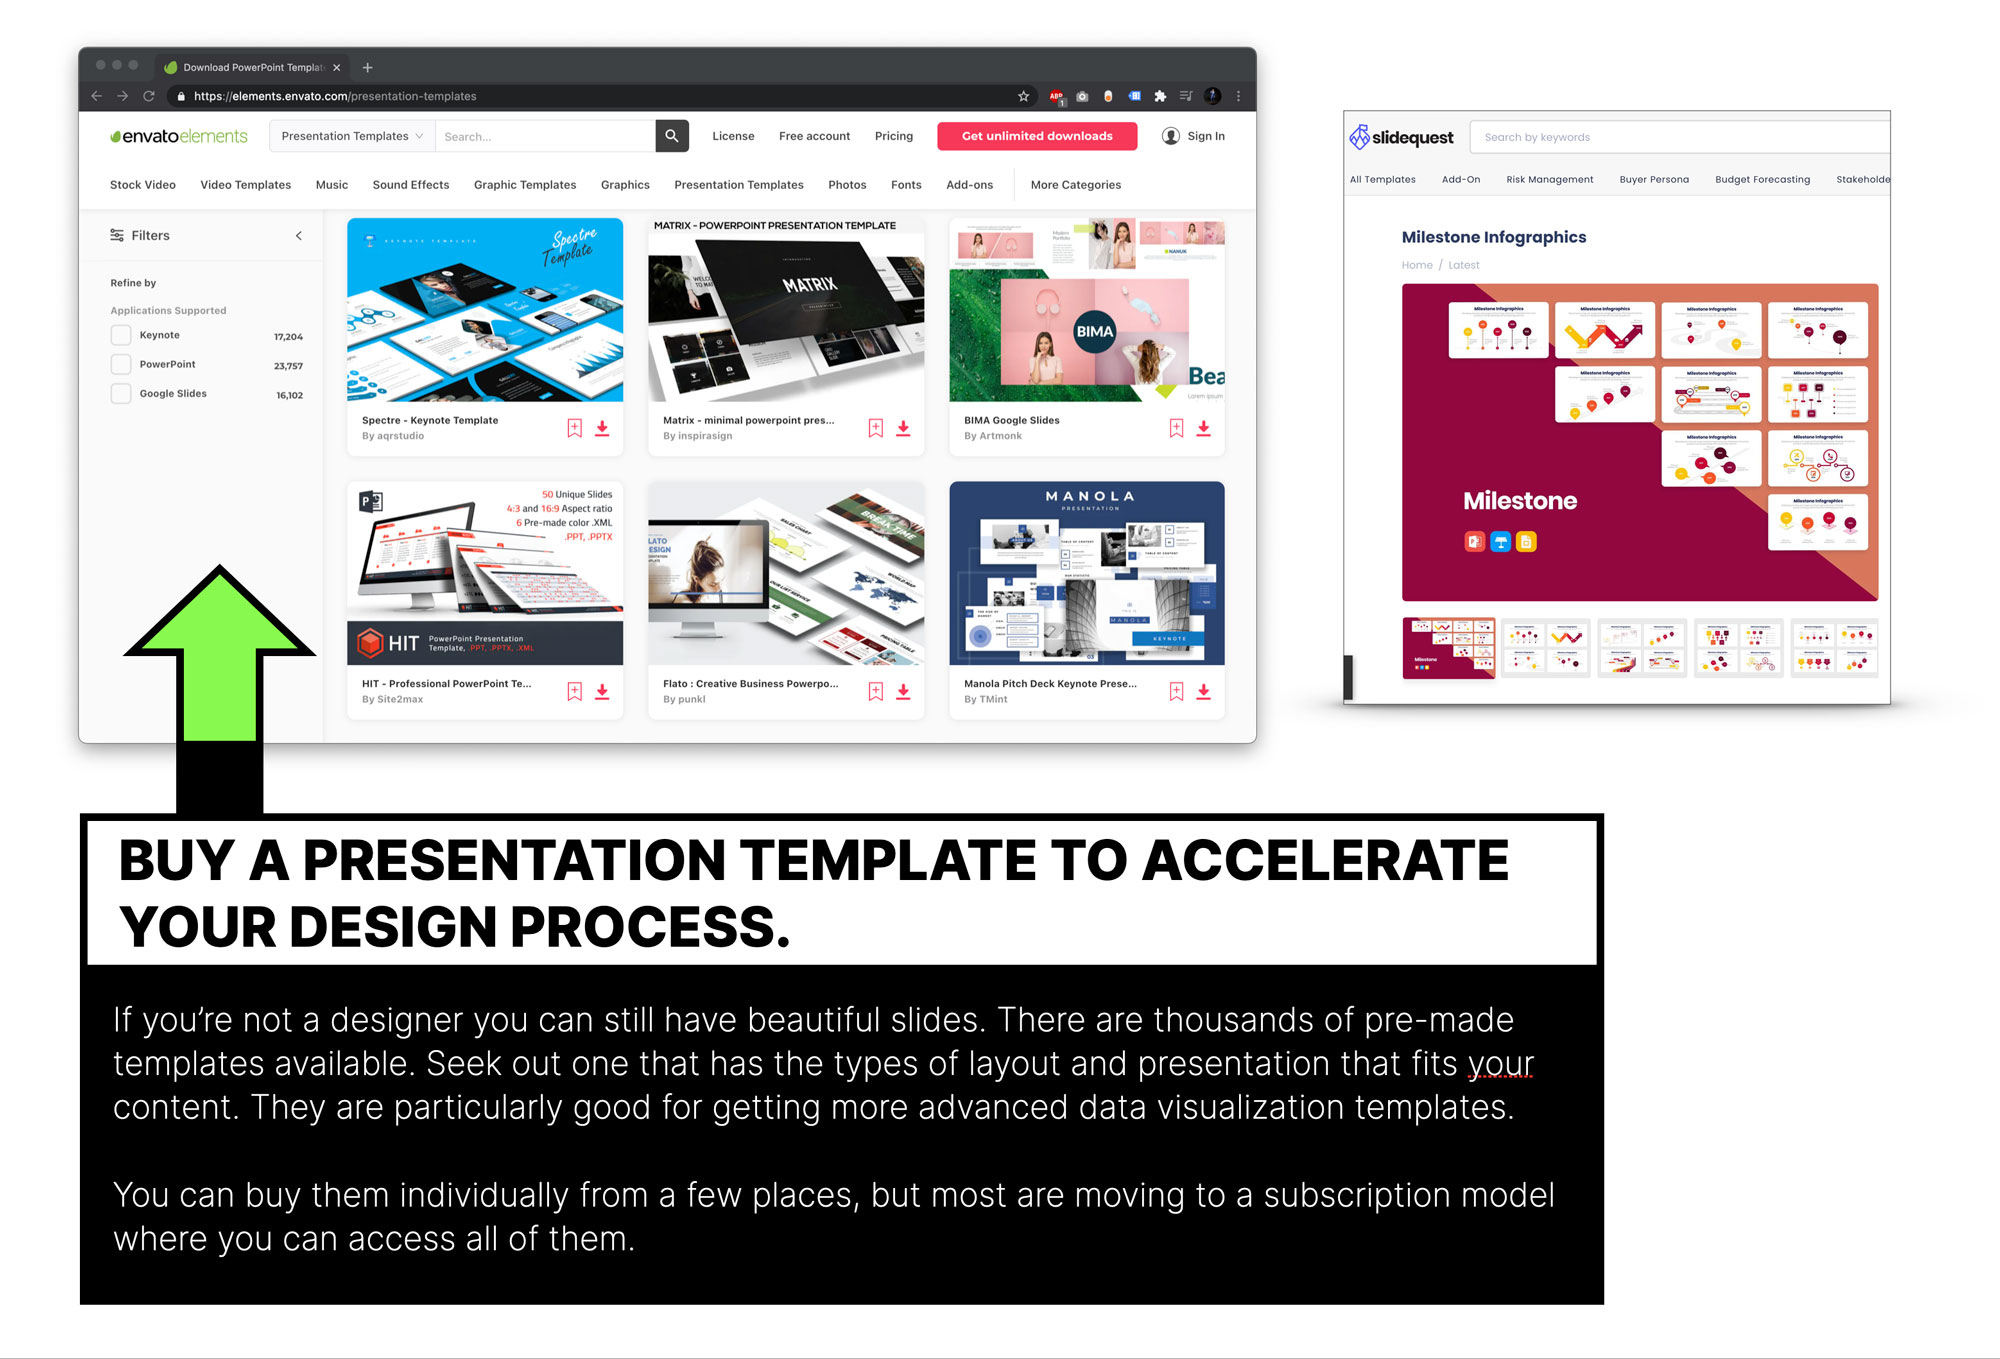 Paid presentation templates are a great way to accelerate your slide design.